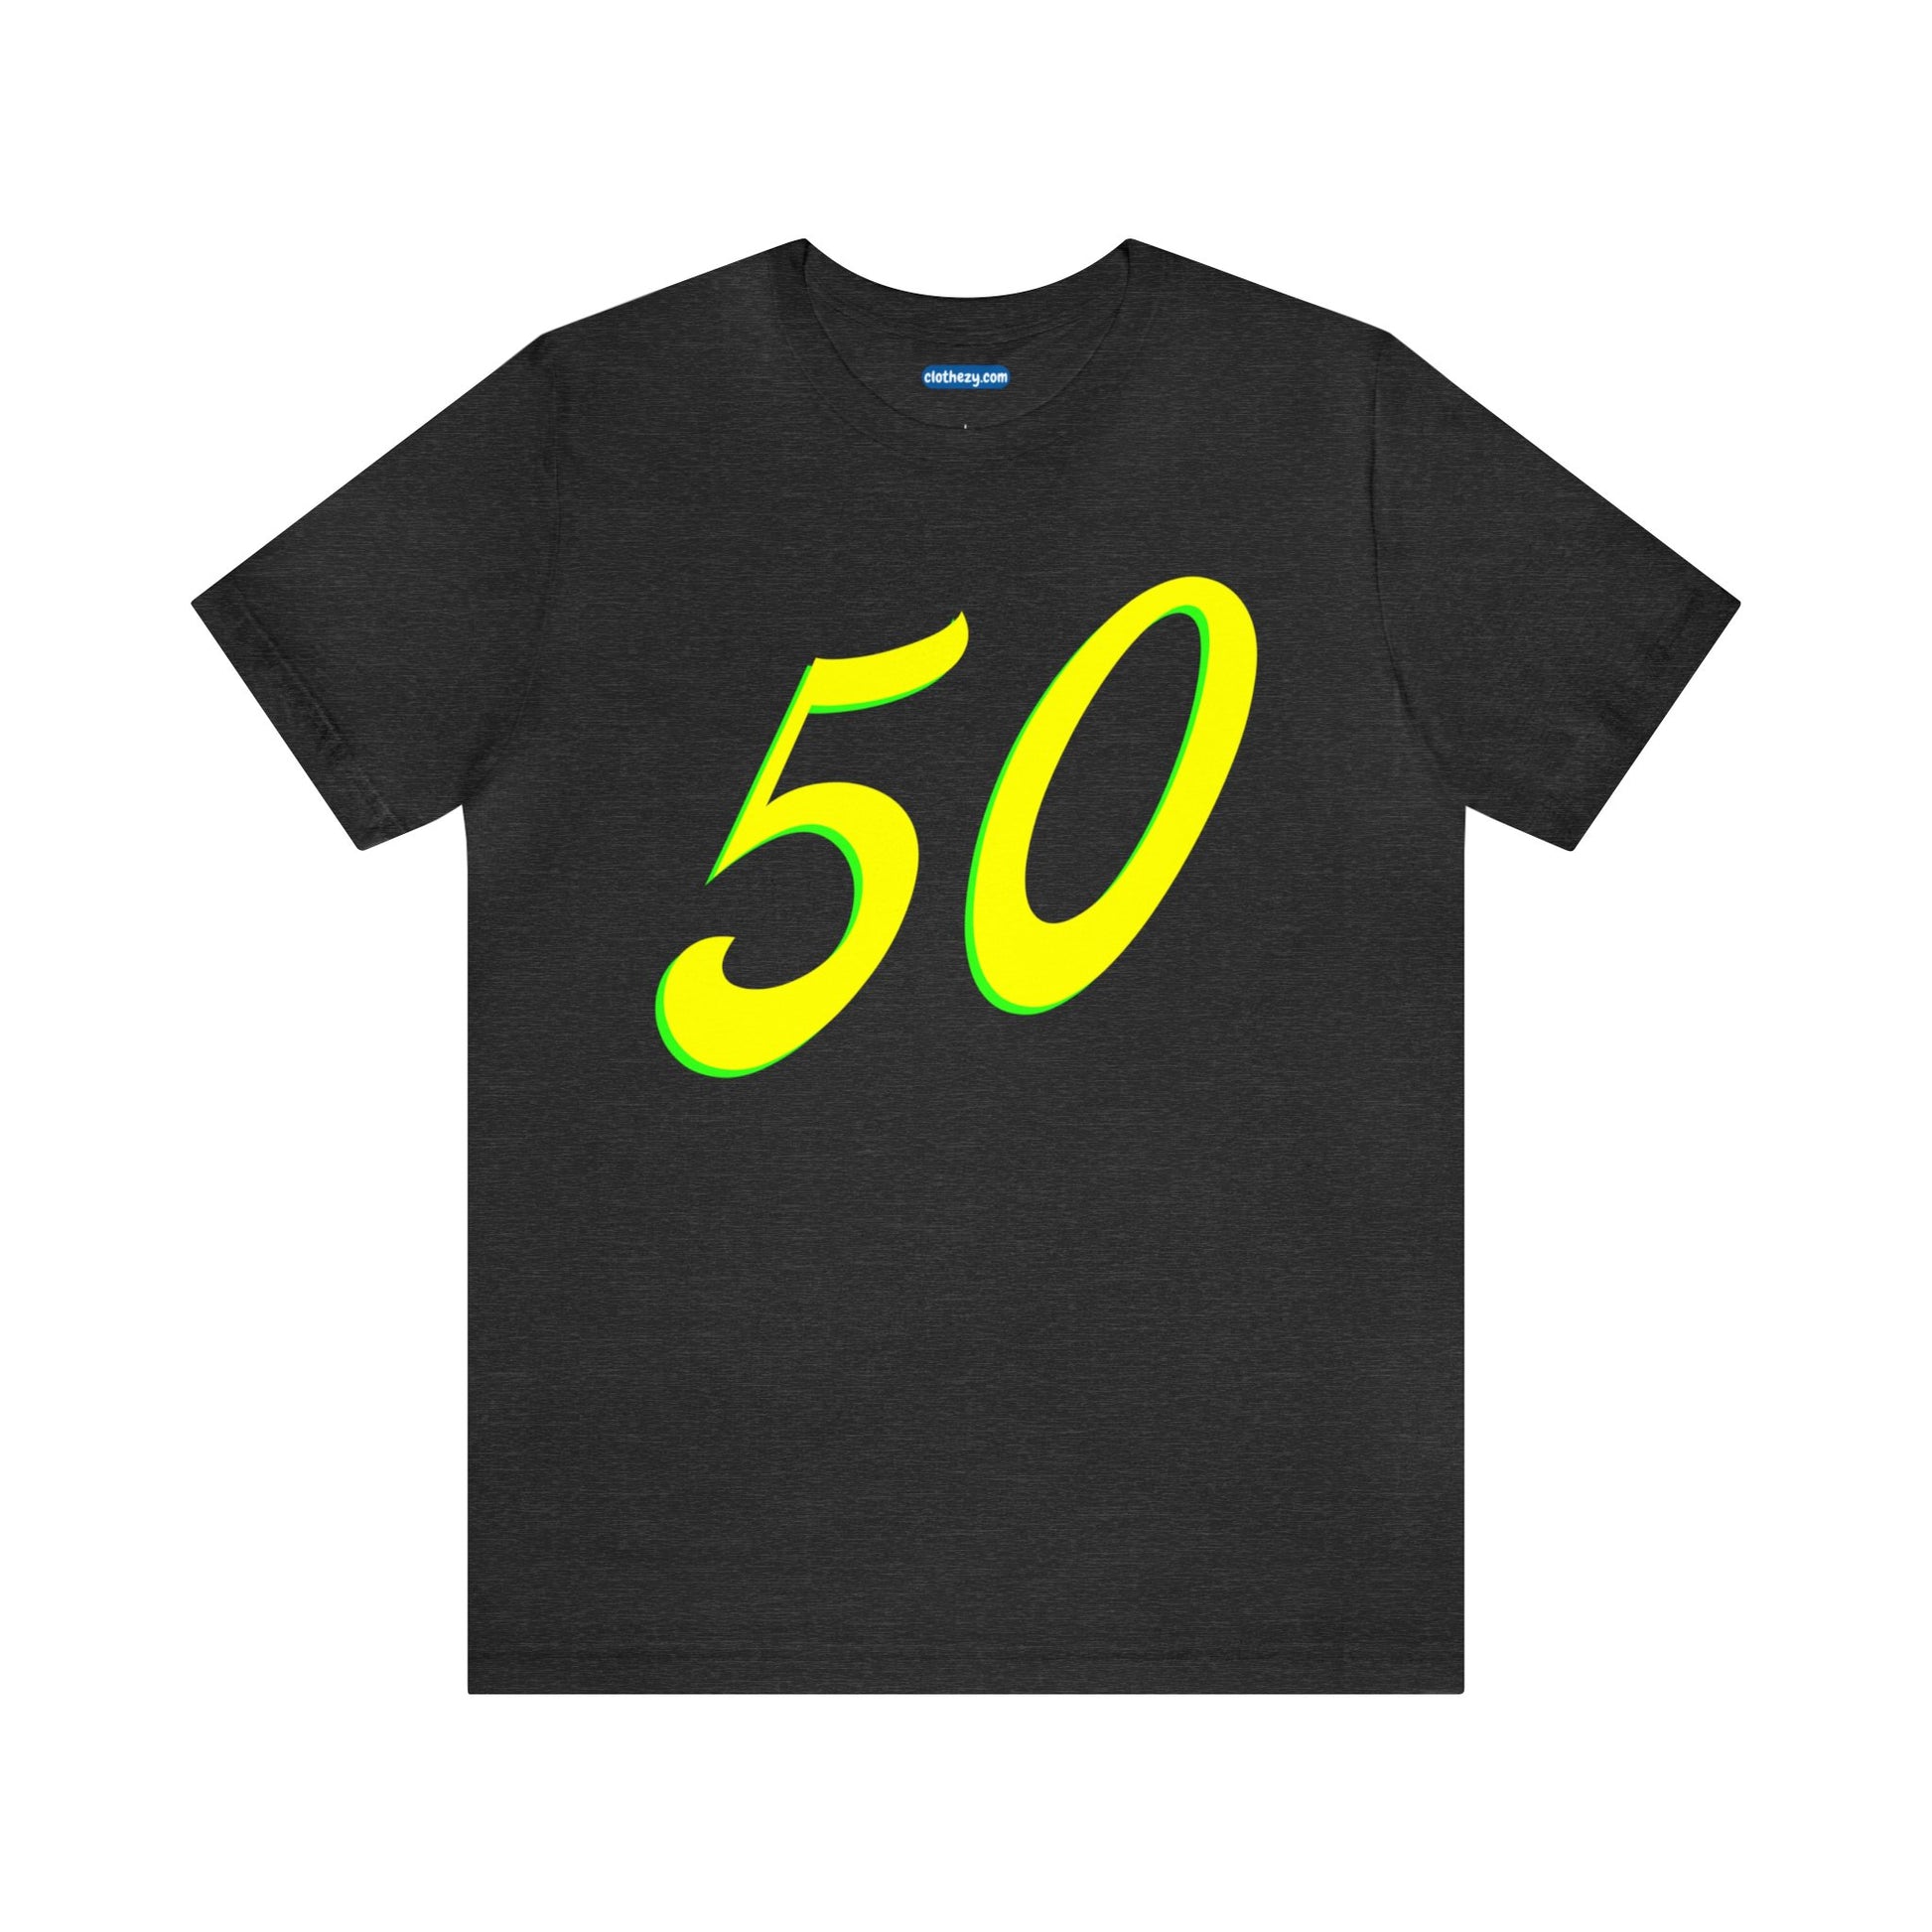 Number 50 Design - Soft Cotton Tee for birthdays and celebrations, Gift for friends and family, Multiple Options by clothezy.com in Gold Size Small - Buy Now